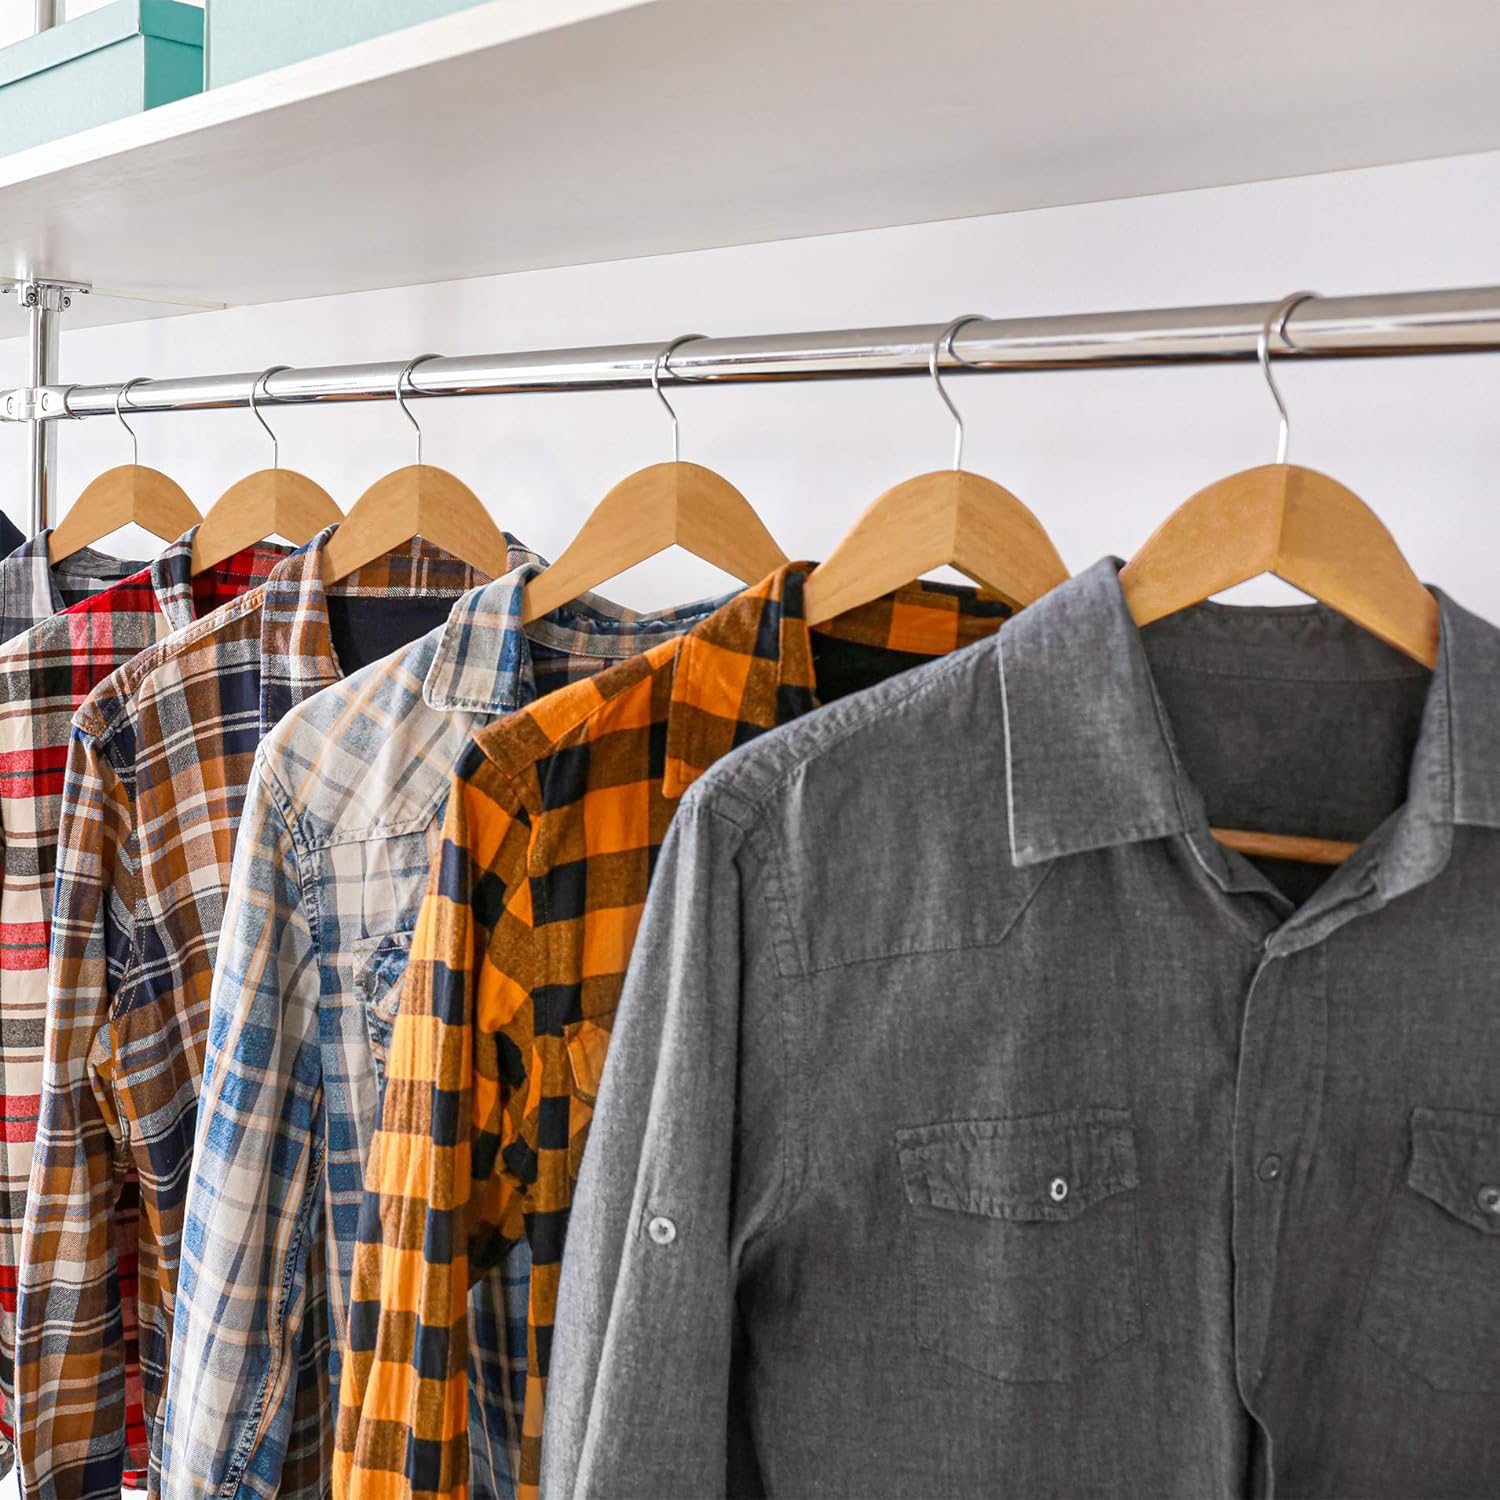 How To Store Your Seasonal Clothes？